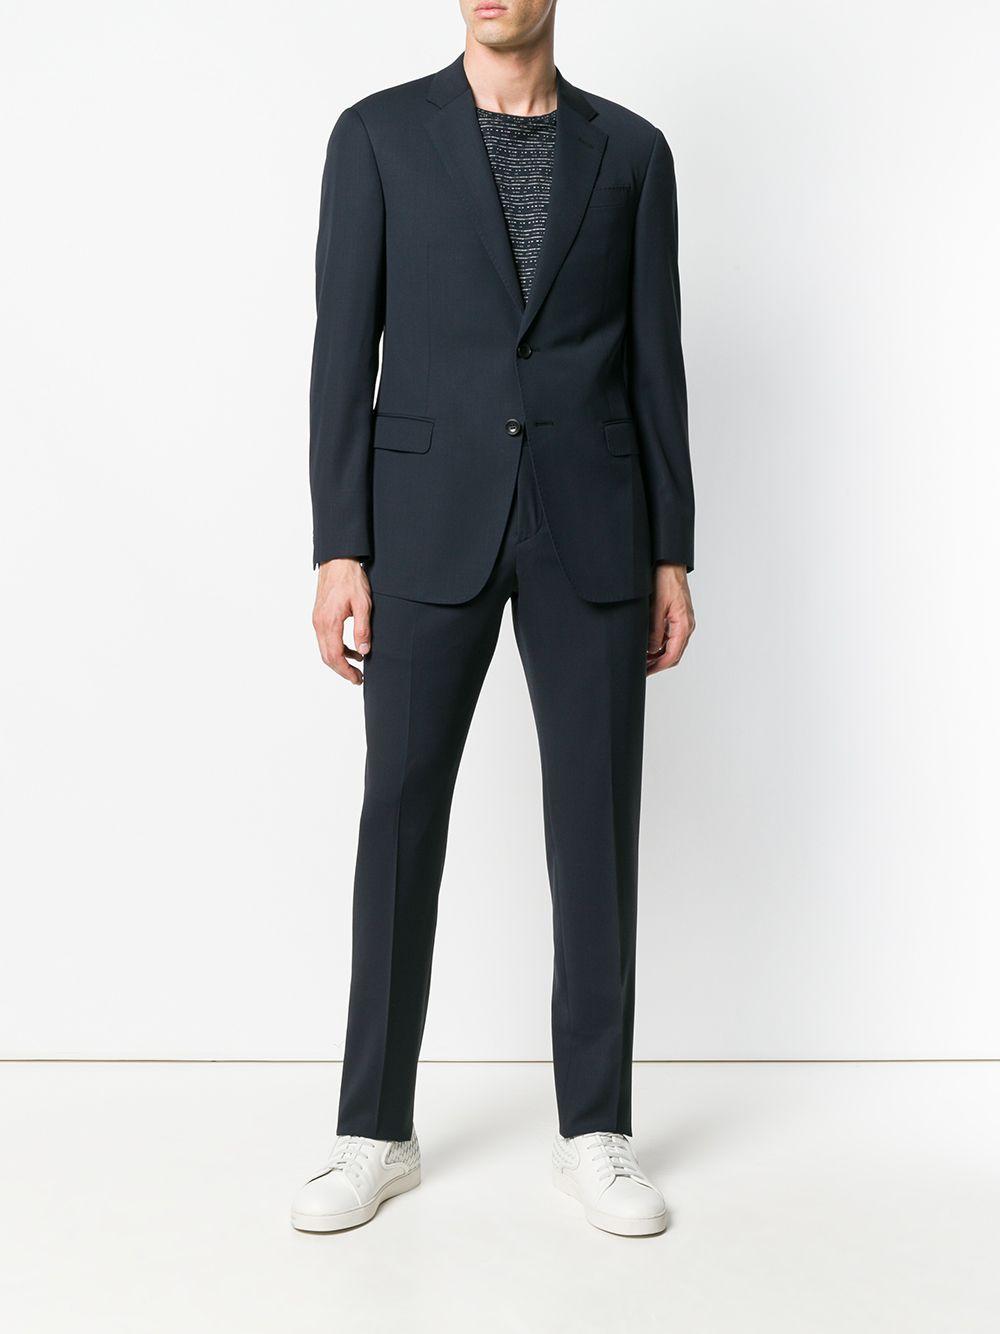 Giorgio Armani Wool Suit in Blue for Men - Lyst